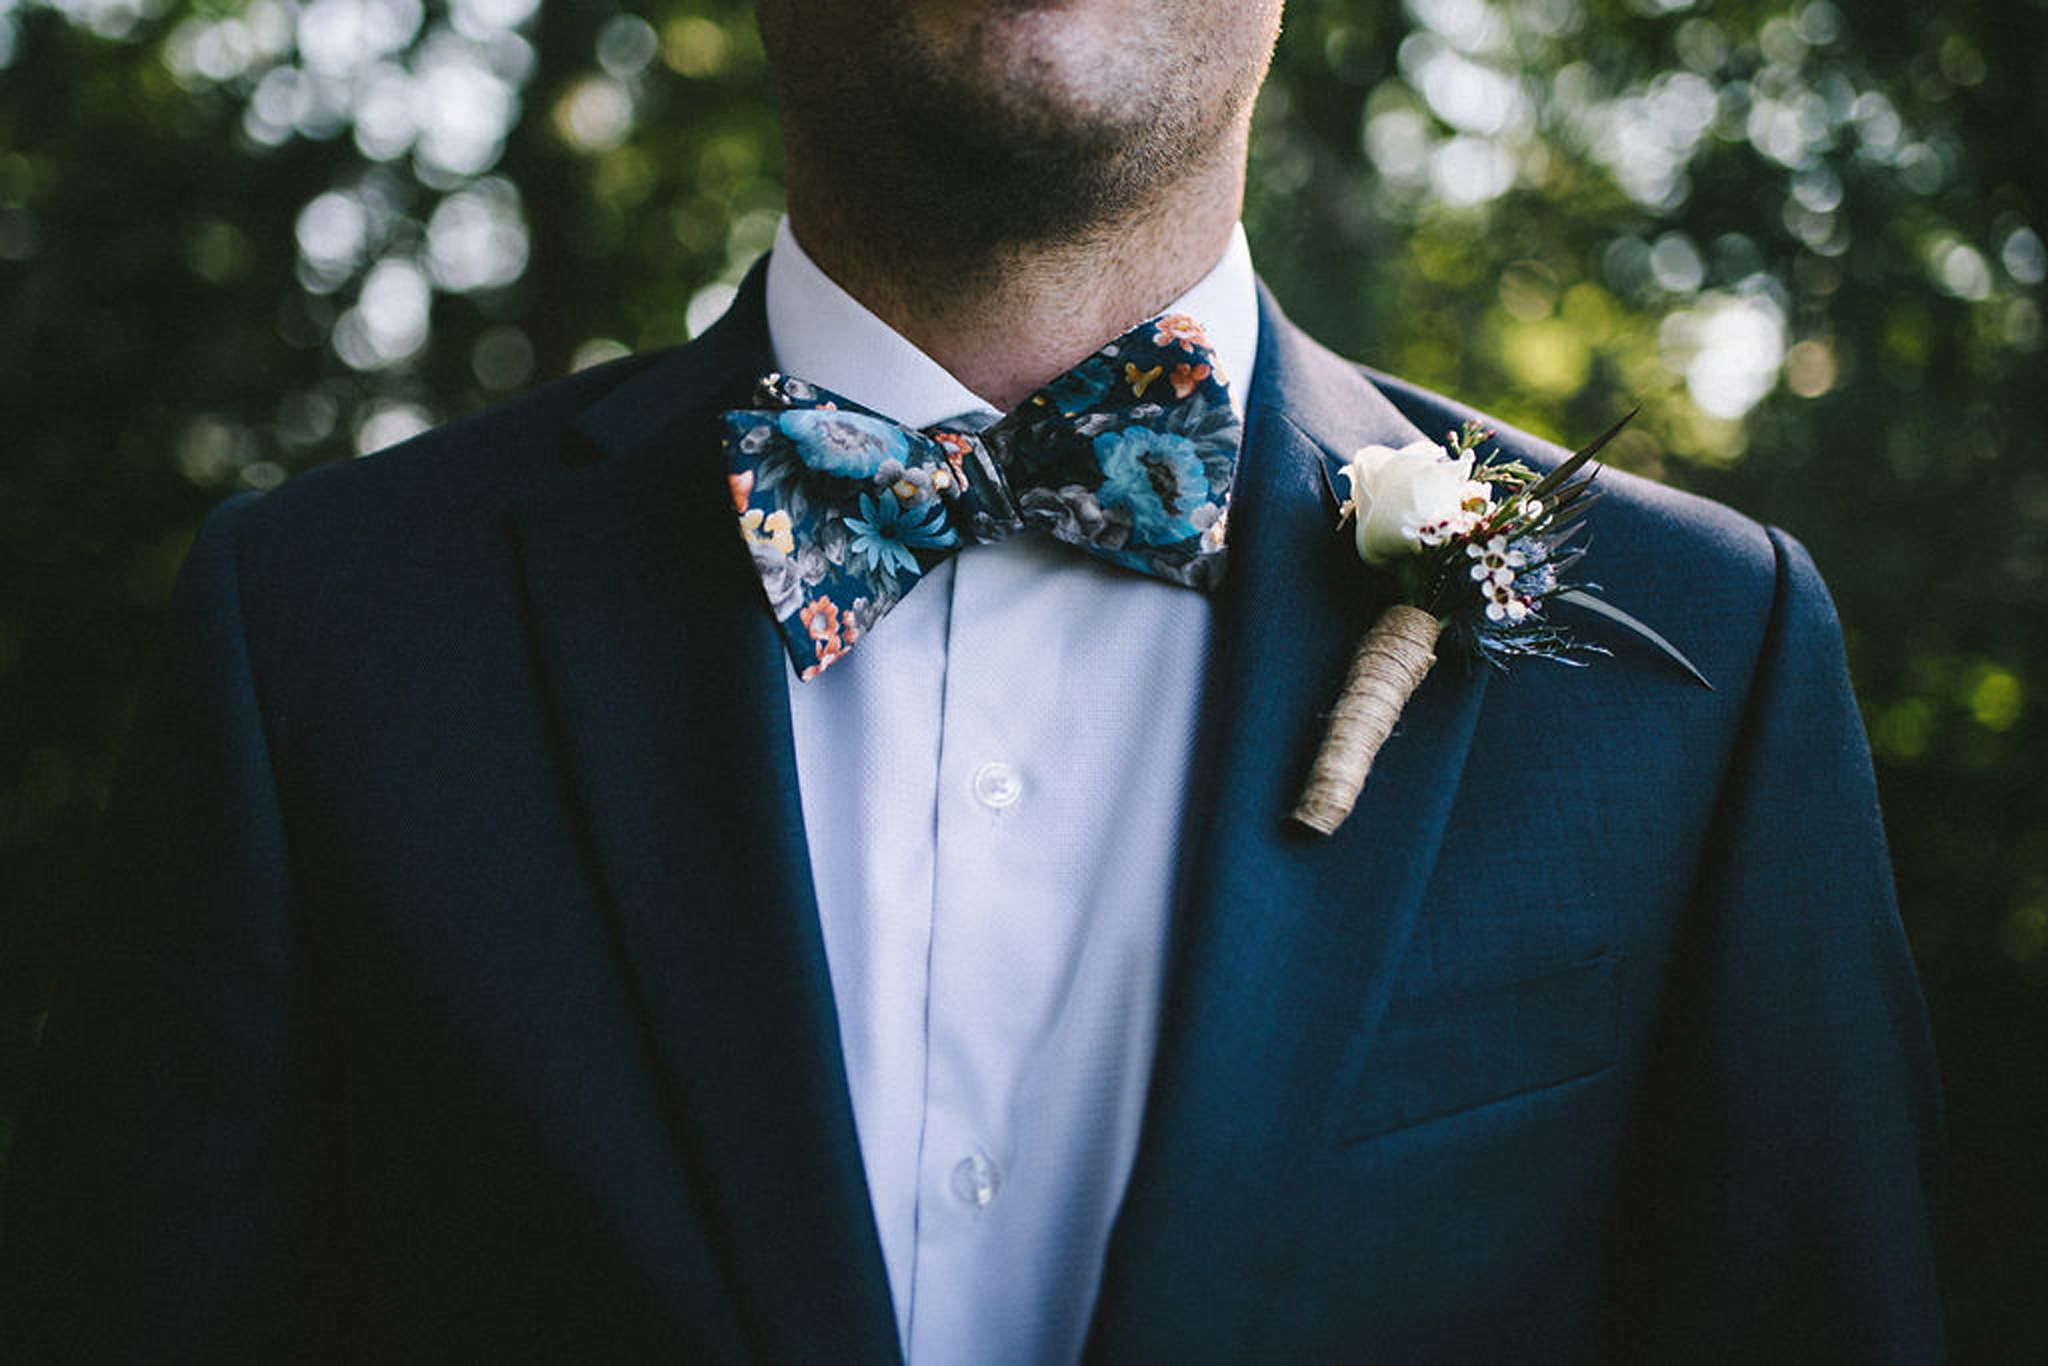 Floral bowtie groom style at camp wedding in Parry Sound